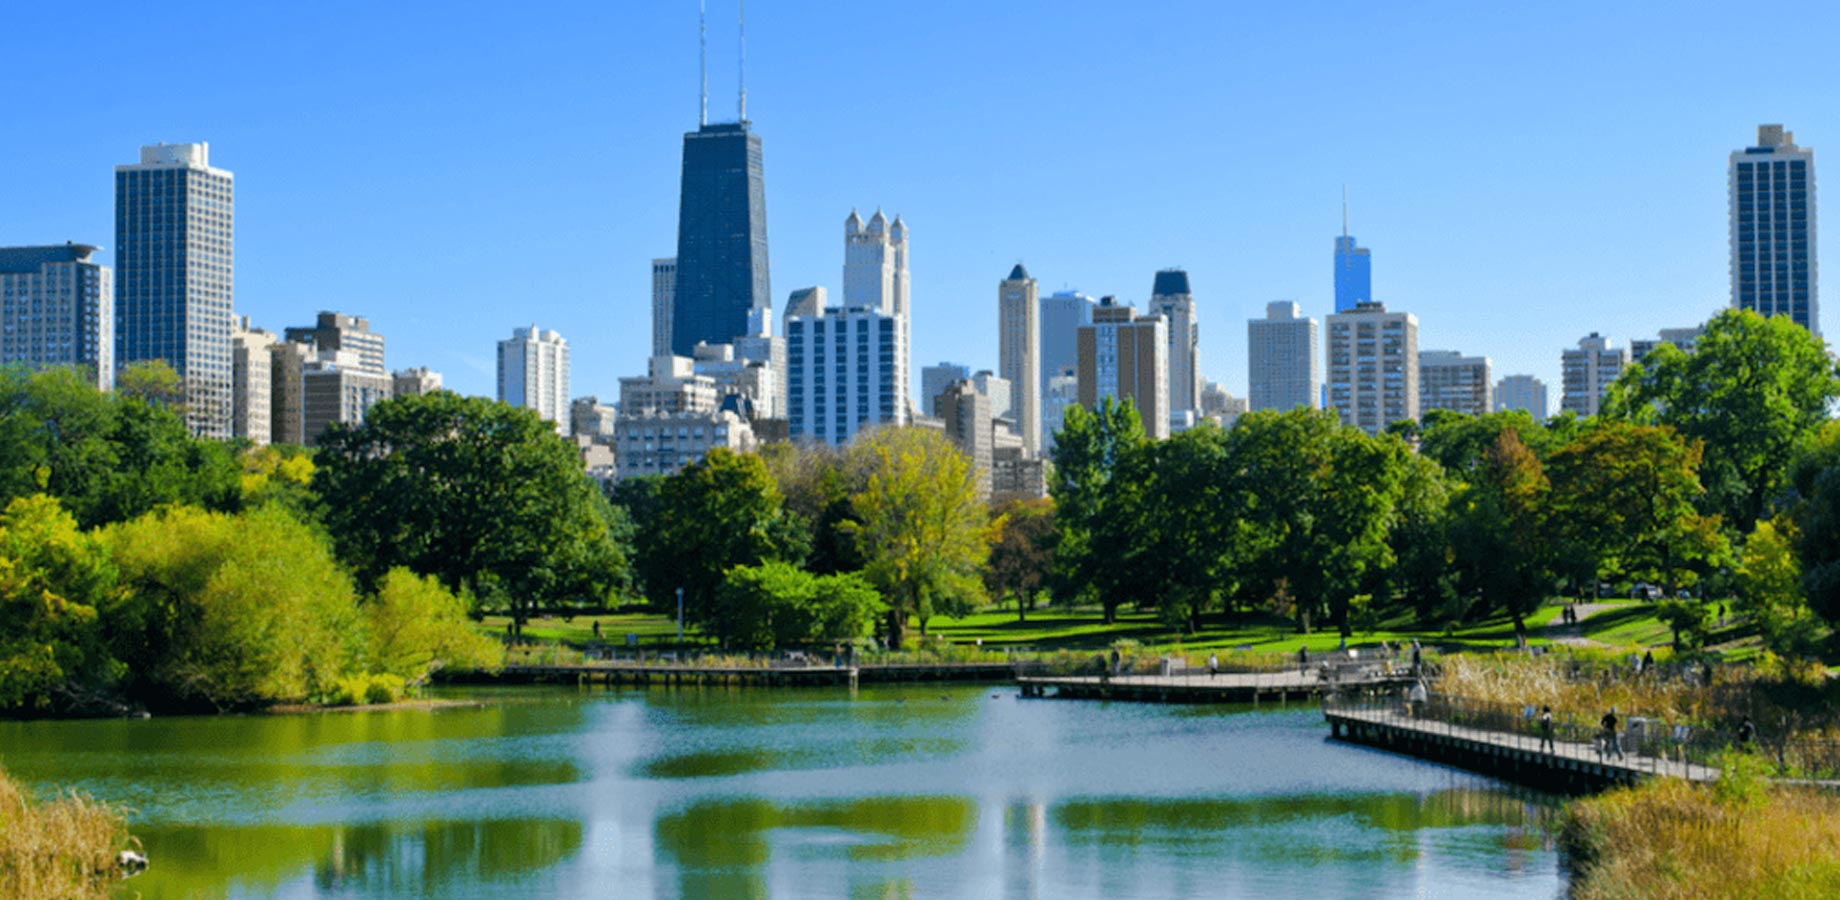 Looking at Chicago's Lincoln Park skyline through a park with a body of water in front.